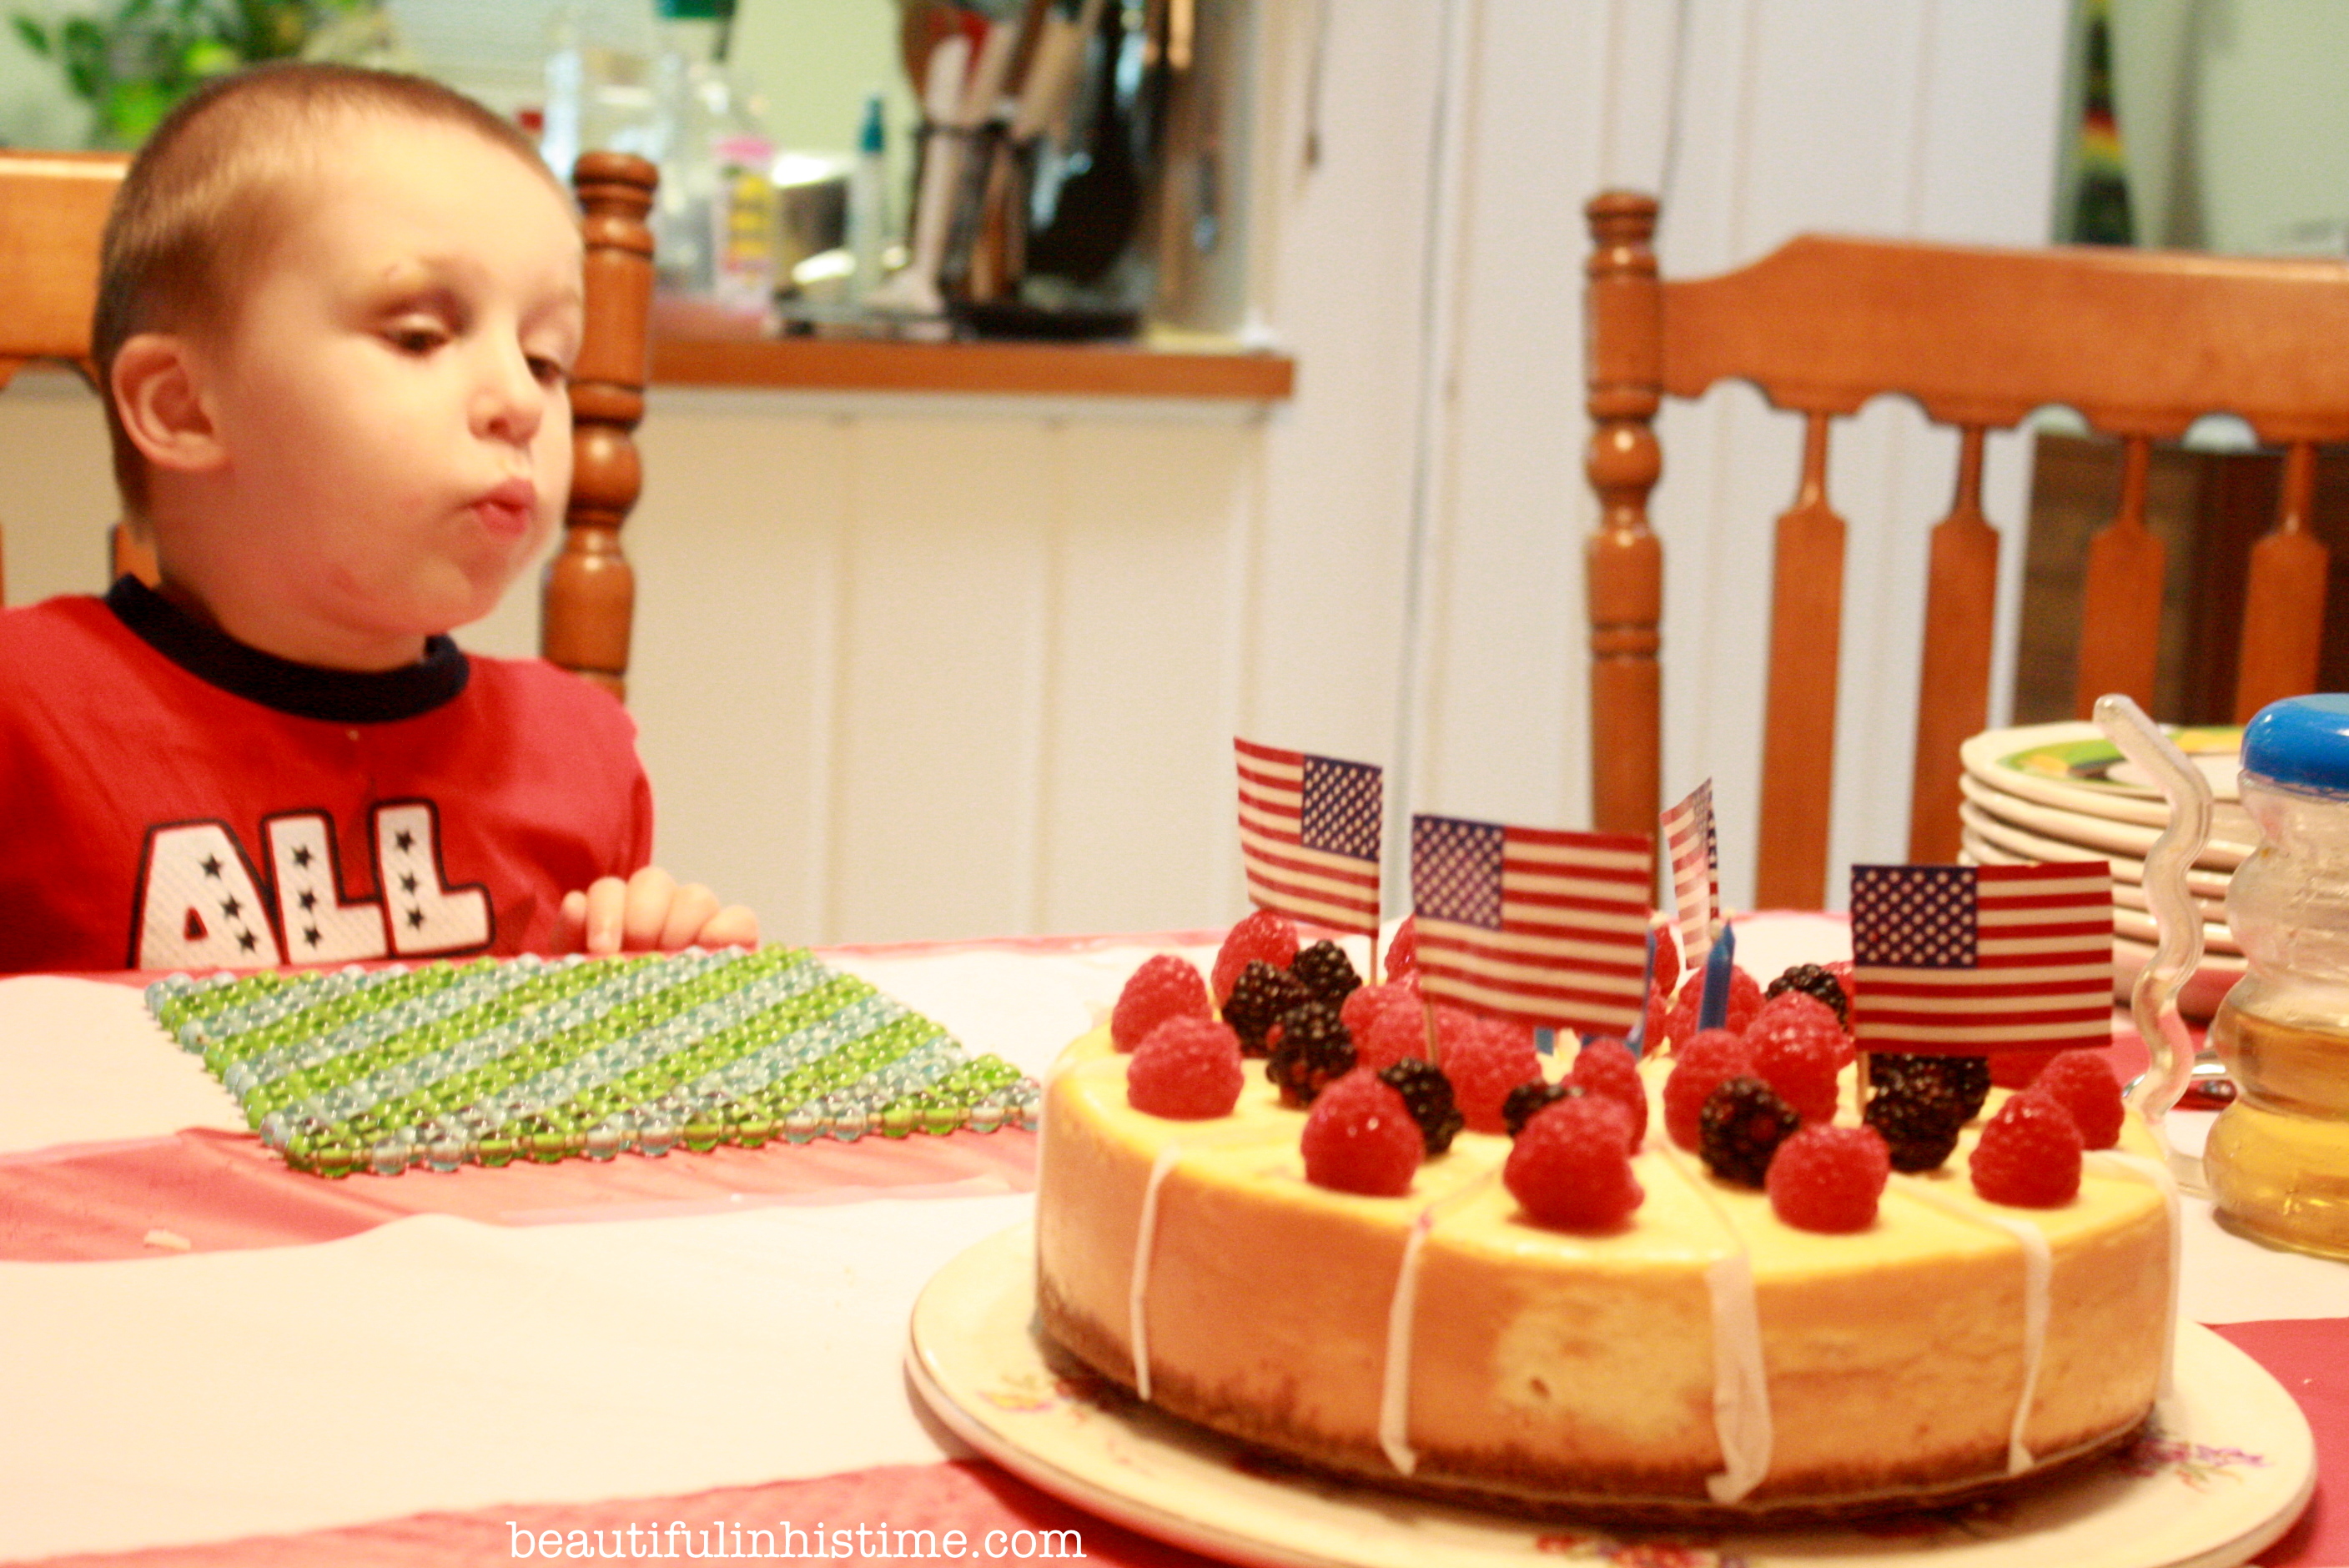 blowing out candles: A Birthday Party for America! #birthday #america #4thofjuly #independenceday #party #birthdayparty #candles #birthdaycake